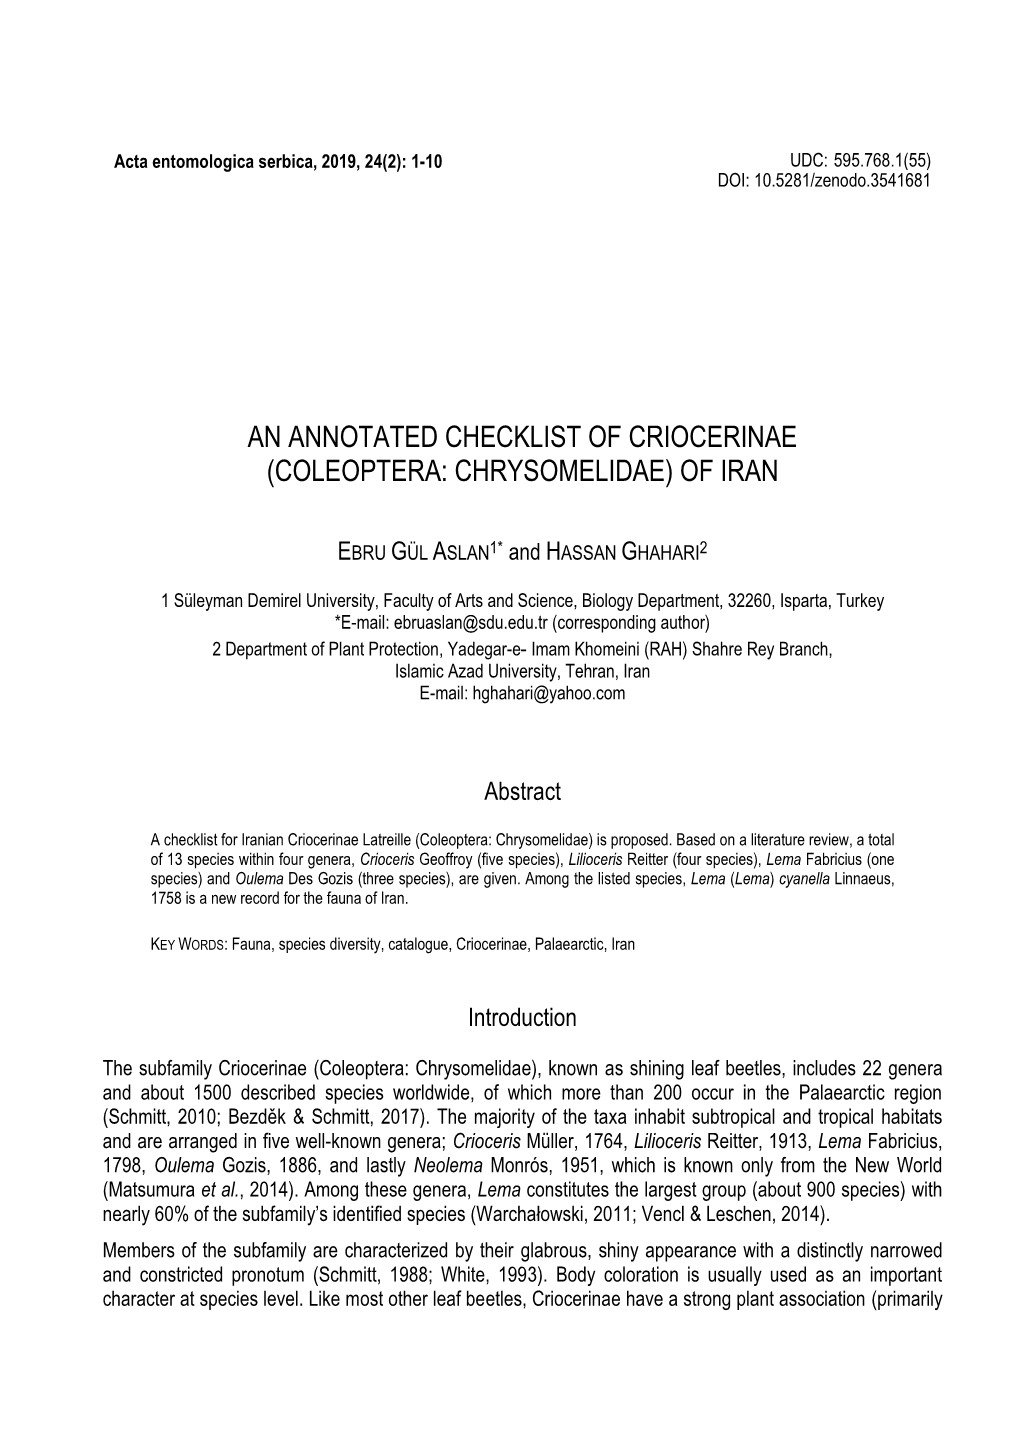 An Annotated Checklist of Criocerinae (Coleoptera: Chrysomelidae) of Iran